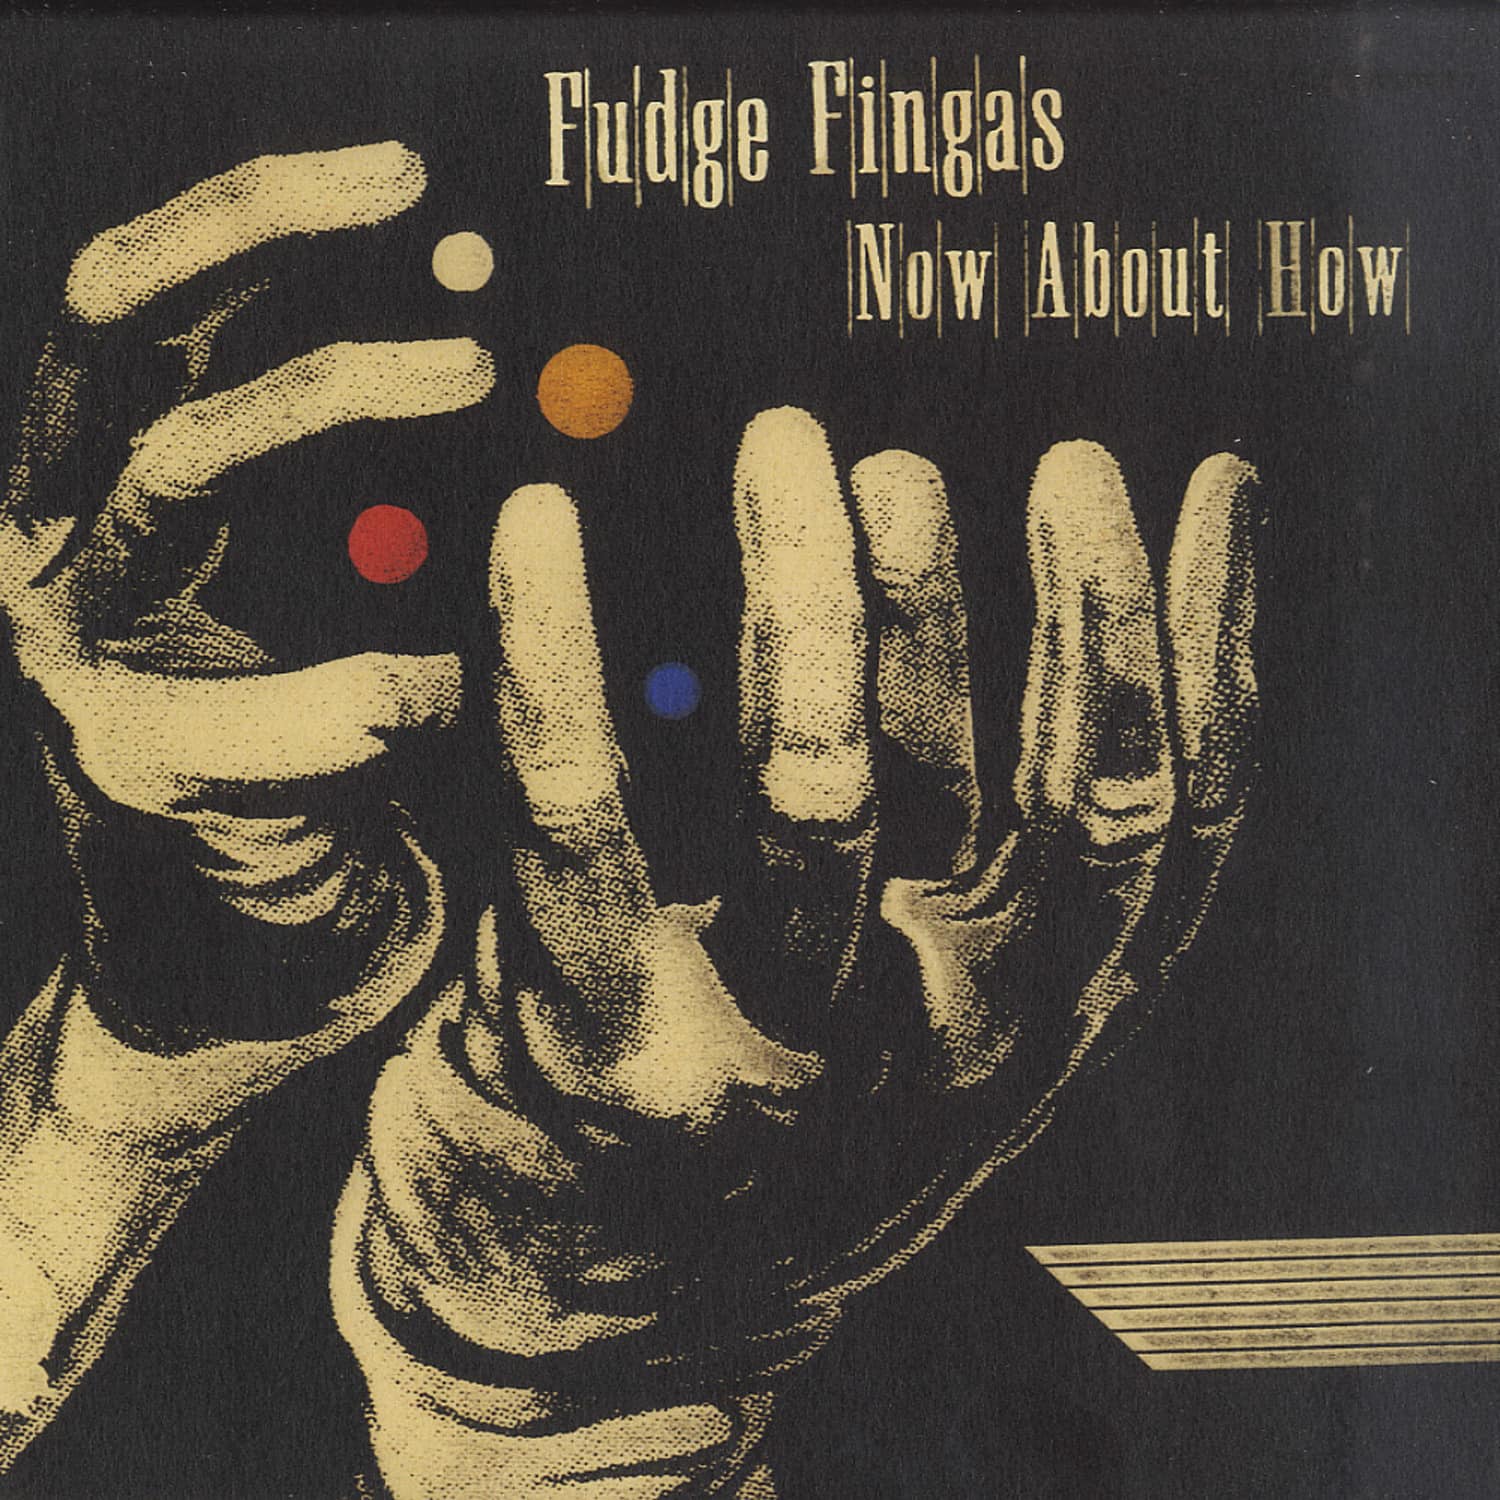 Fudge Fingas - NOW ABOUT HOW 